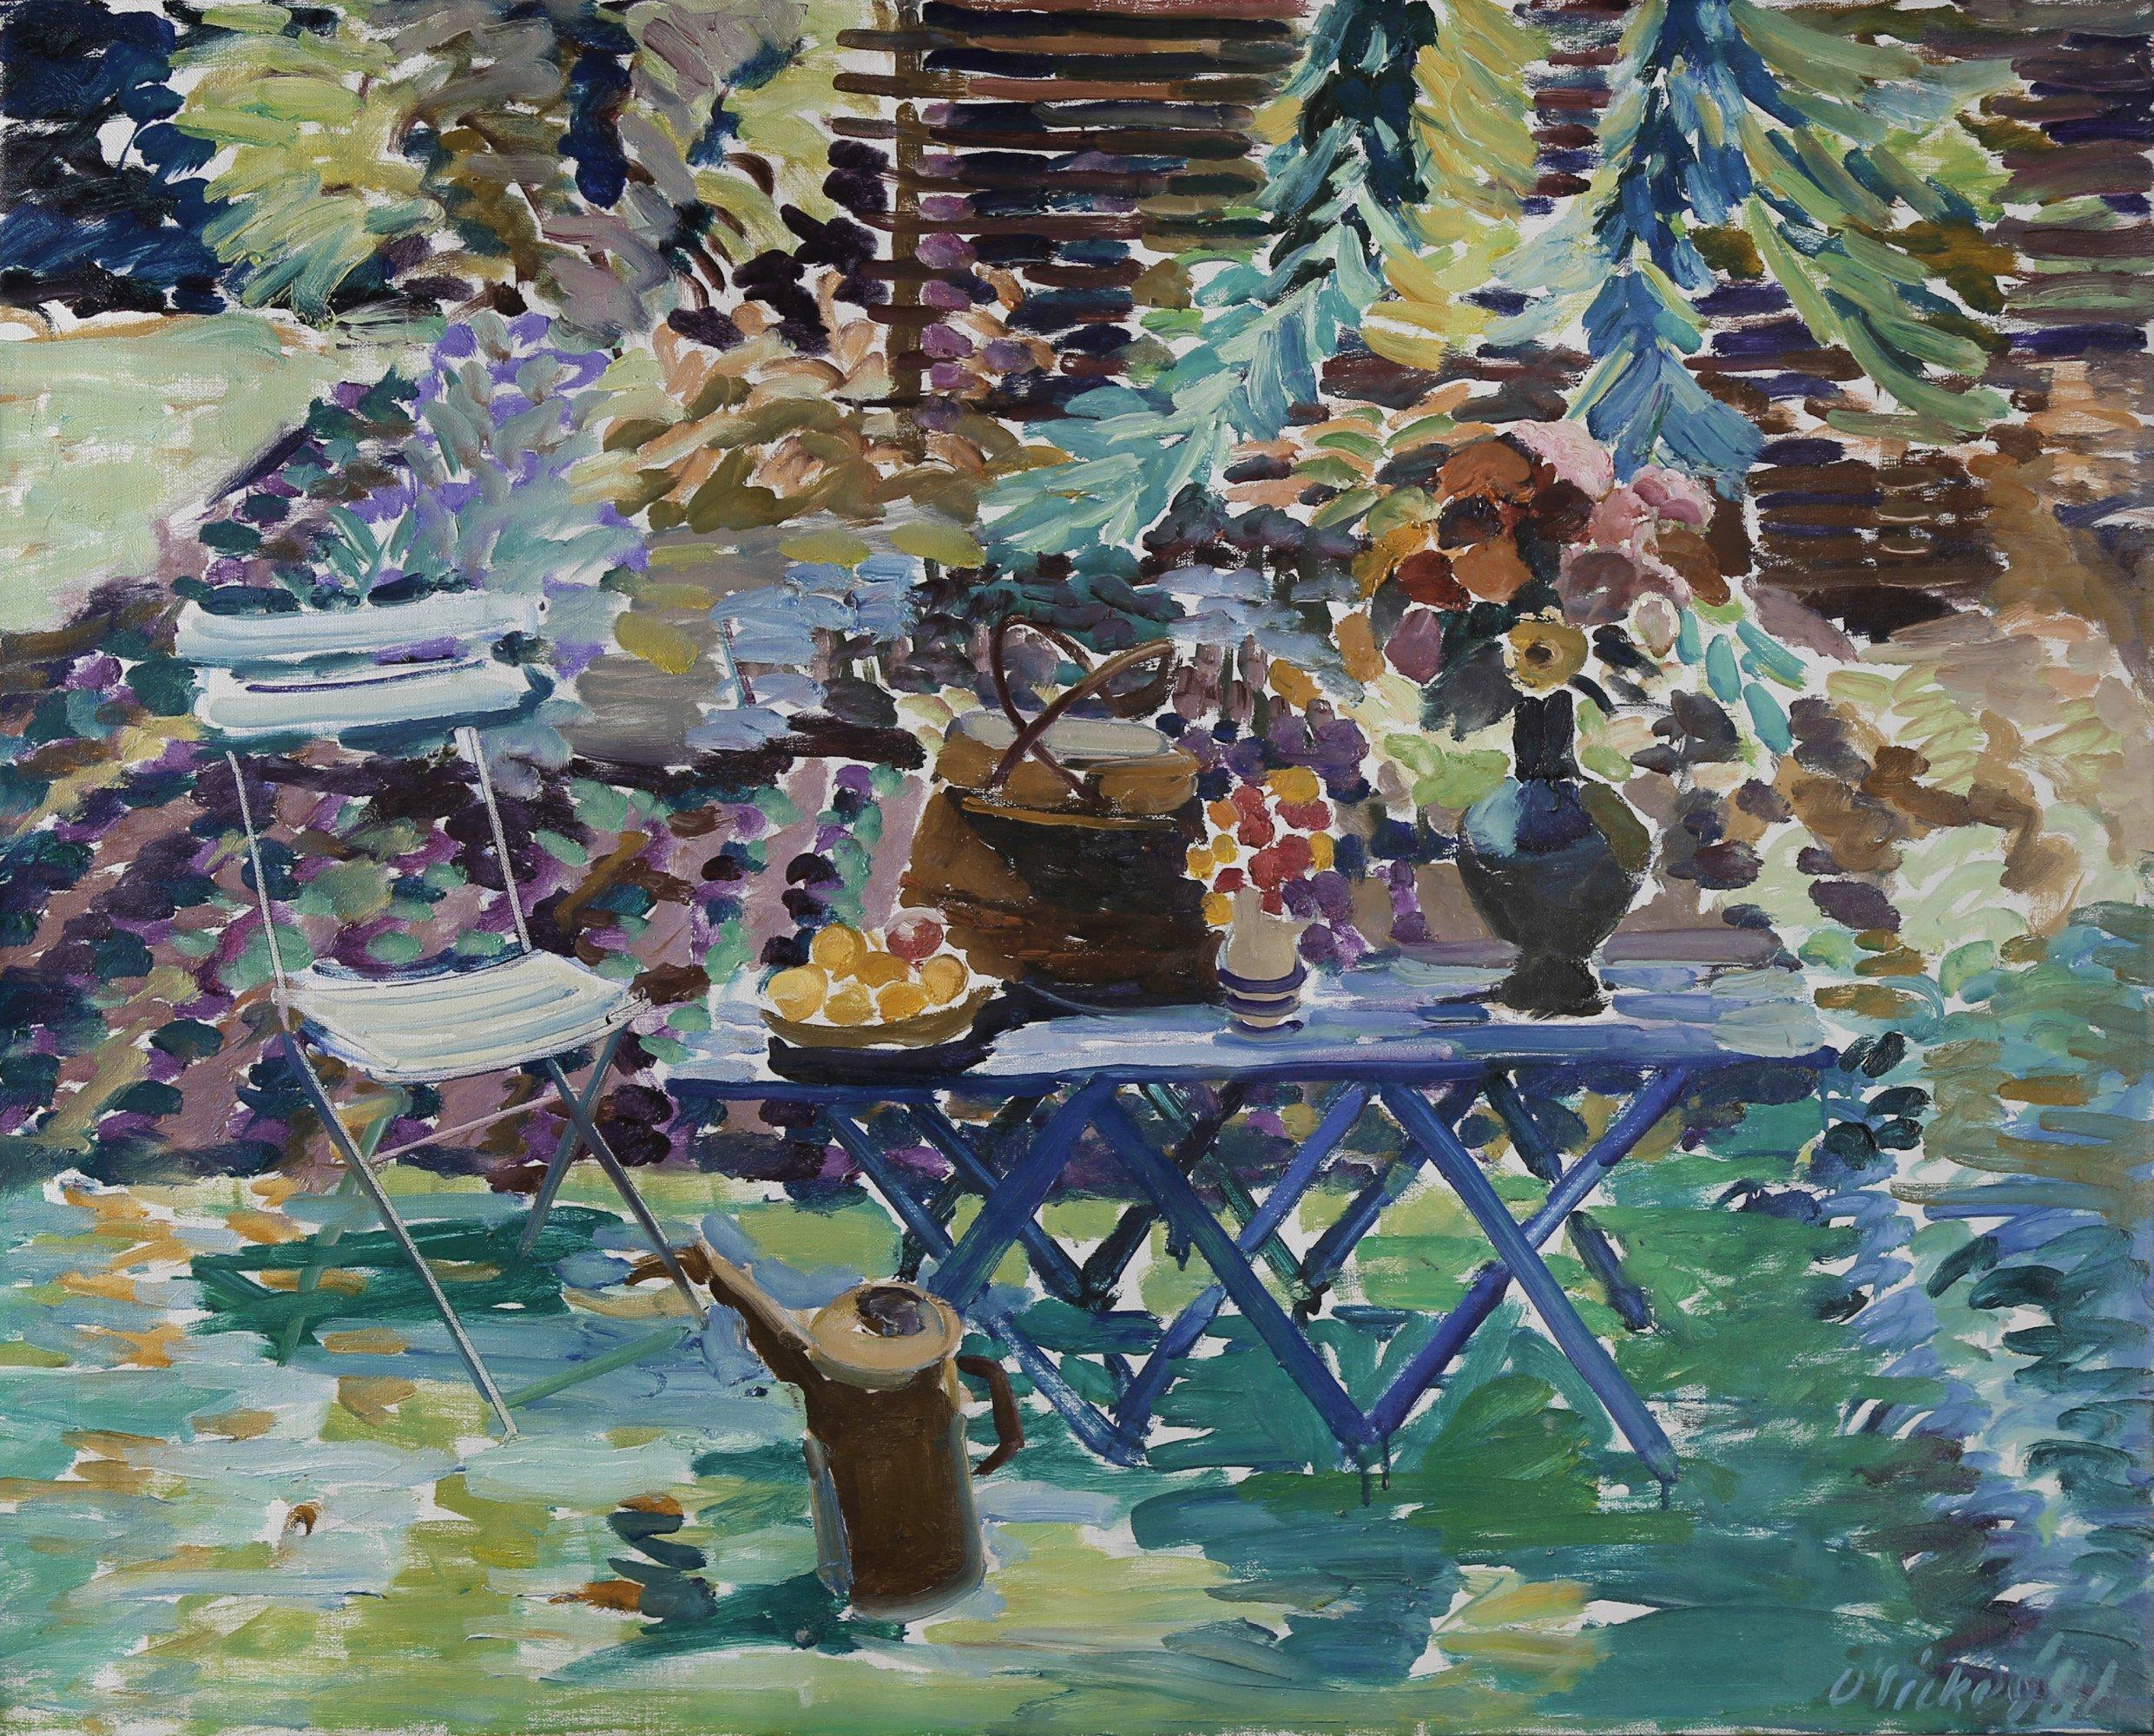 Joseph O'Sickey Figurative Painting - Garden Still-Life, large colorful 20th century post-impressionist painting